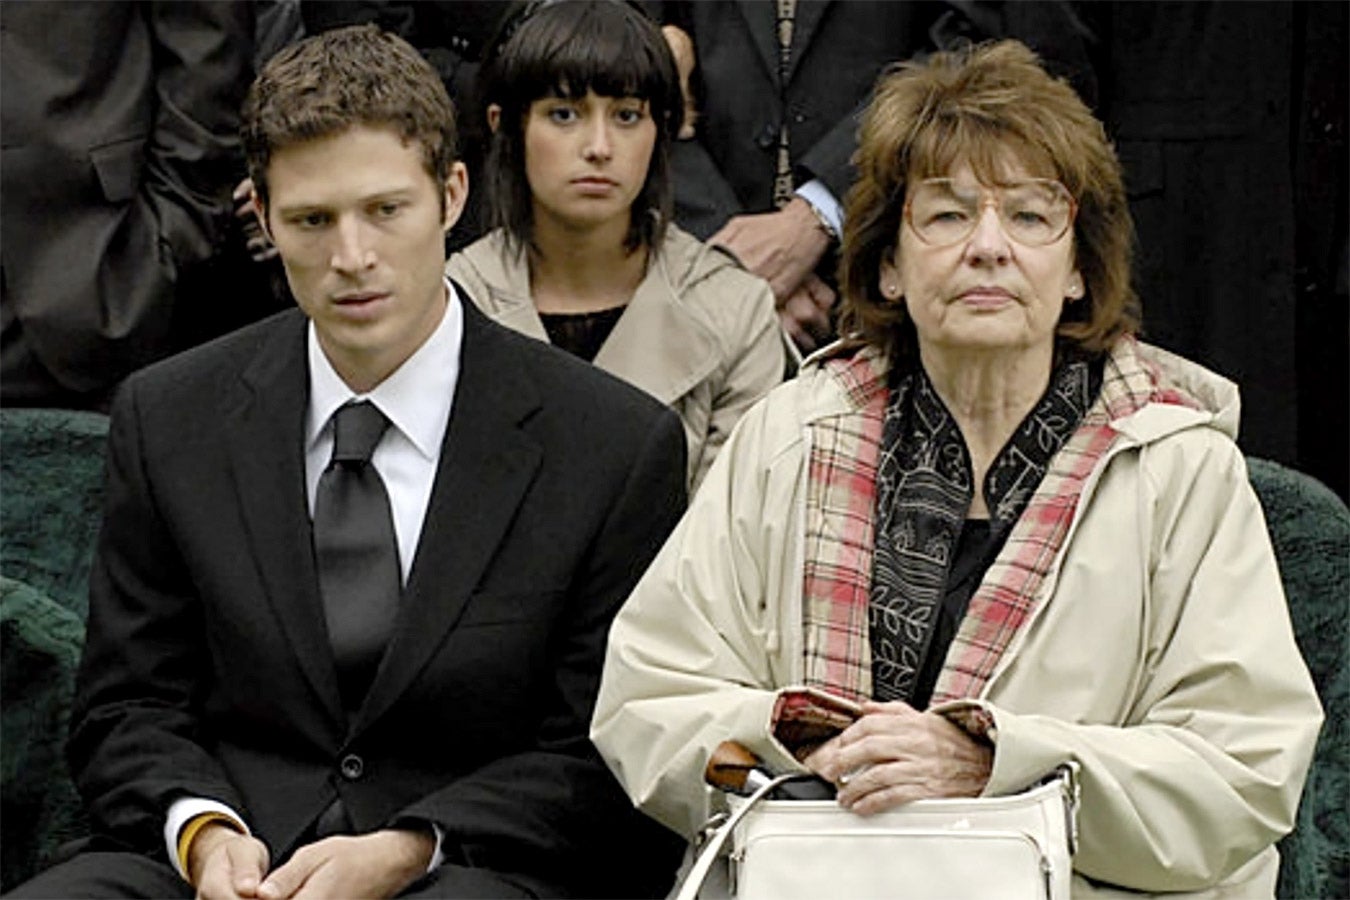 A teen boy and his grandmother look solemn at a funeral.